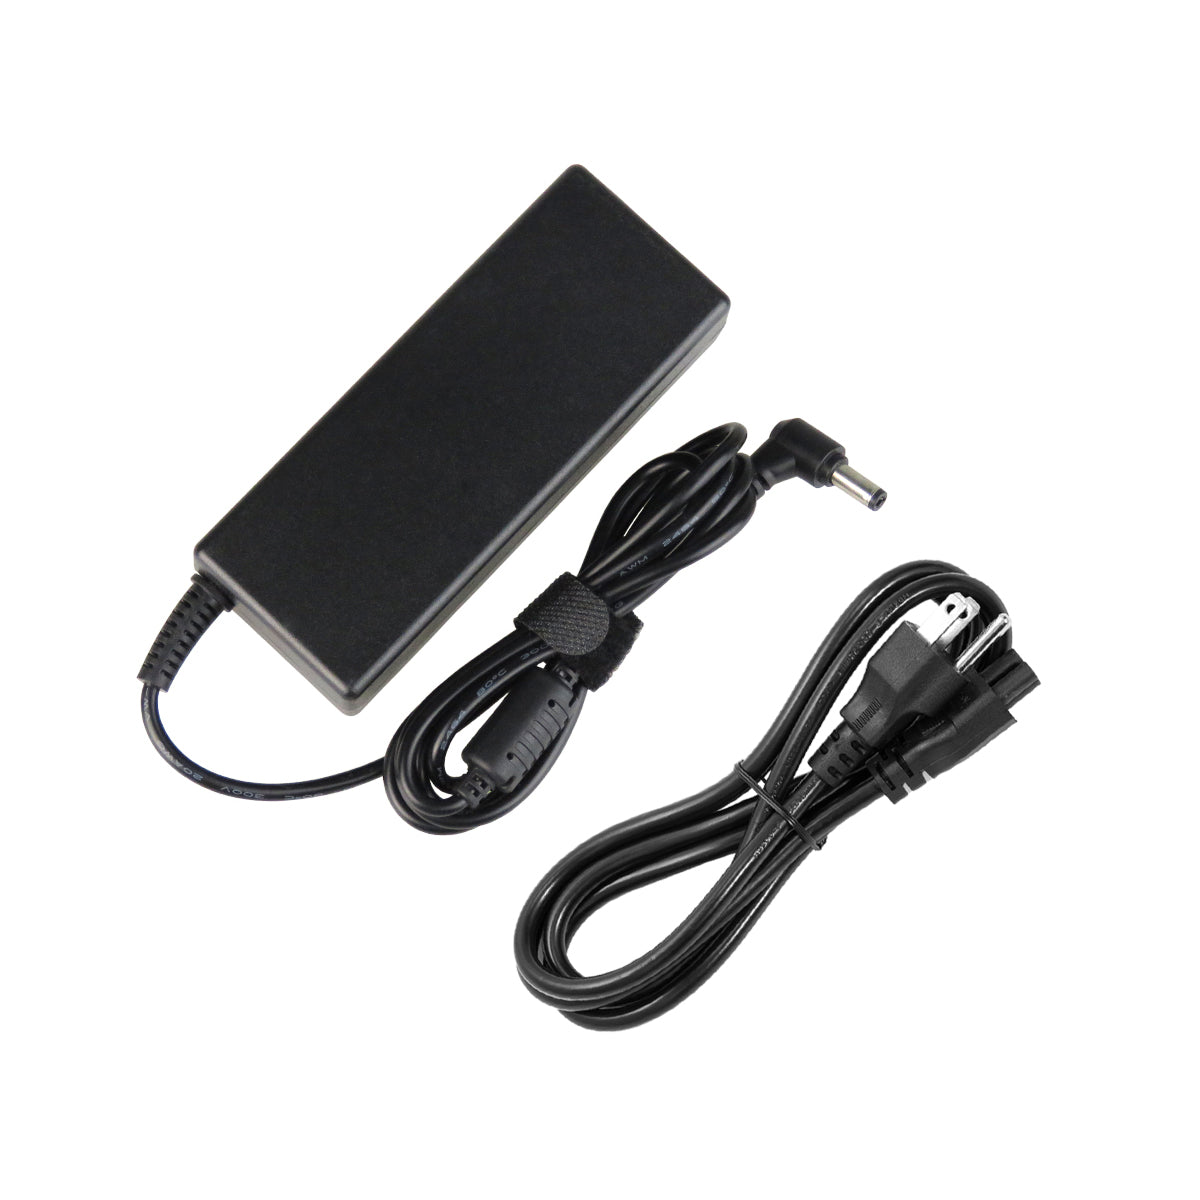 AC Adapter Charger for Toshiba Satellite s55-a5257 Notebook.